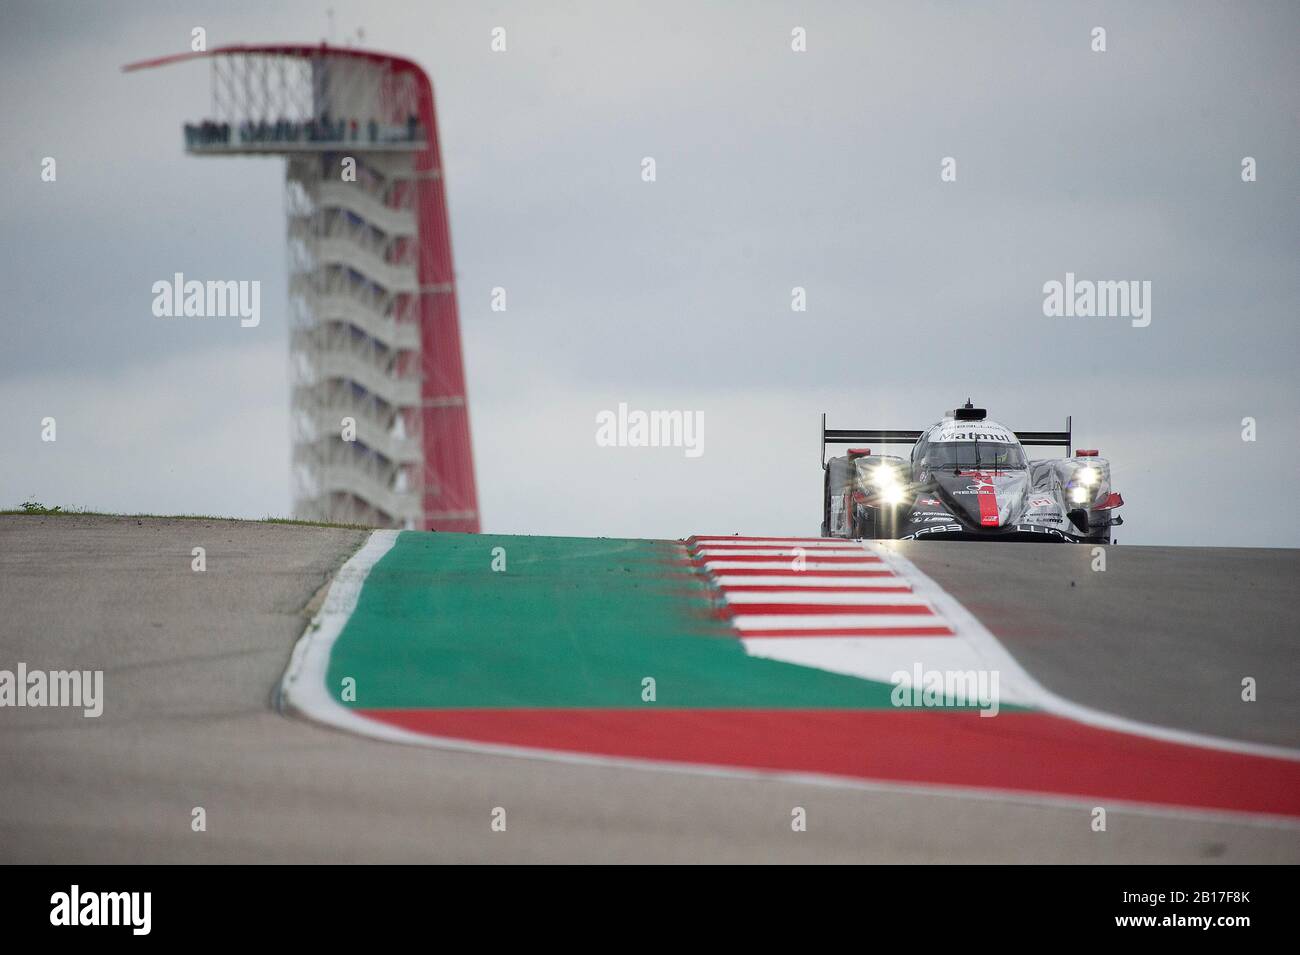 Austin, Texas, USA. 23rd Feb, 2020. Rebellion Racing Bruno Senna (Driver 1), Gustavo Menezes (Driver 2), and Norman Nato (Driver 3) with LMP1 #01 racing the Rebellion R13 Gibson at Lone Star Le Mans - 6 Hours of Circuit of The Americas in Austin, Texas. Mario Cantu/CSM/Alamy Live News Stock Photo